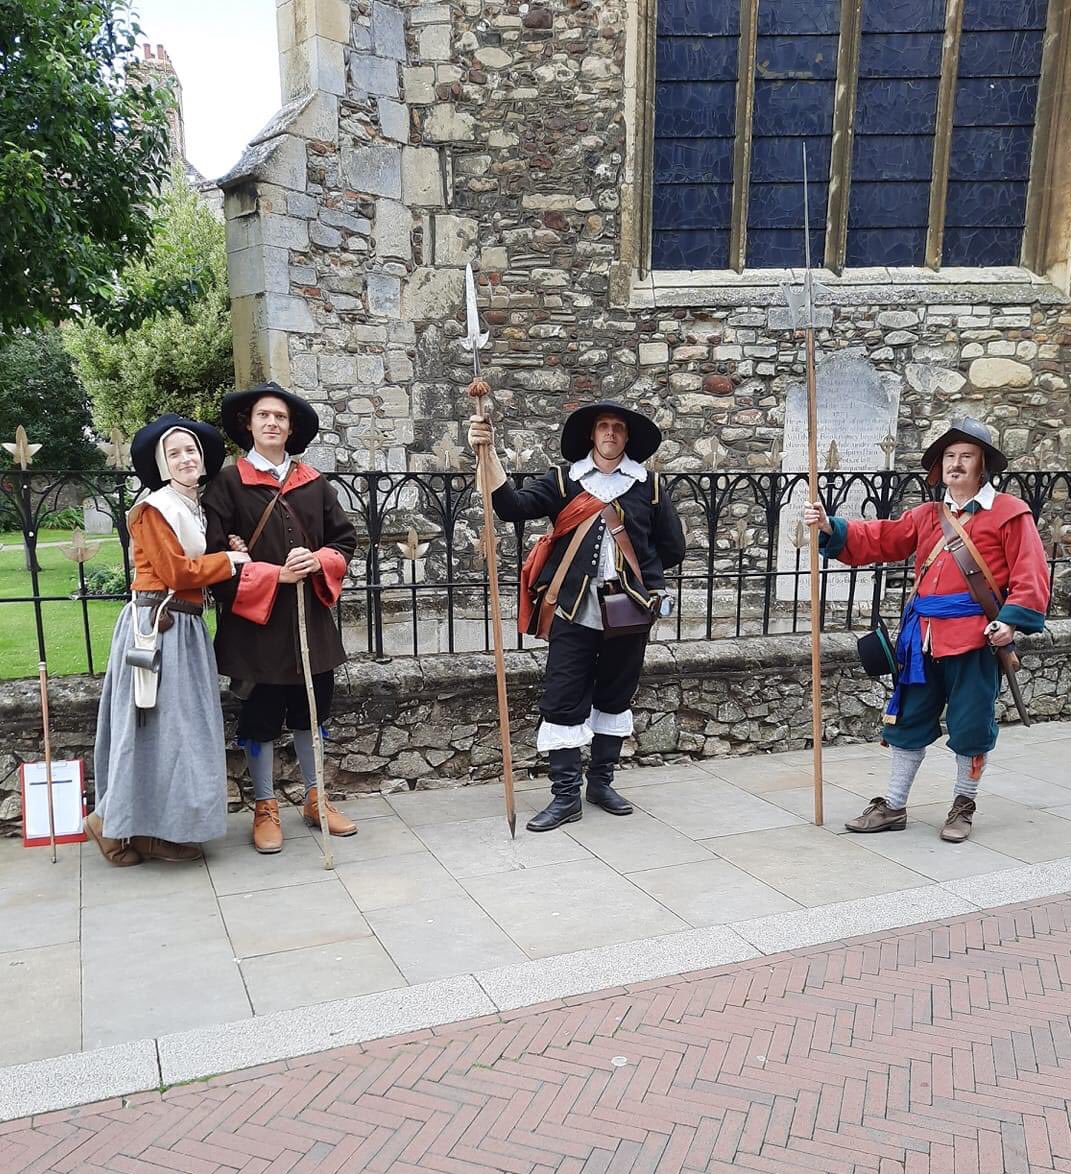 We’ve had a great reopening day today - many thanks to the many visitors, our volunteers and here our (socially distanced) friends from @Sealed_Knot who came to see us but kept Covid-compliant with our new procedures. 😊 #museums #ReopeningHuntingdonshire